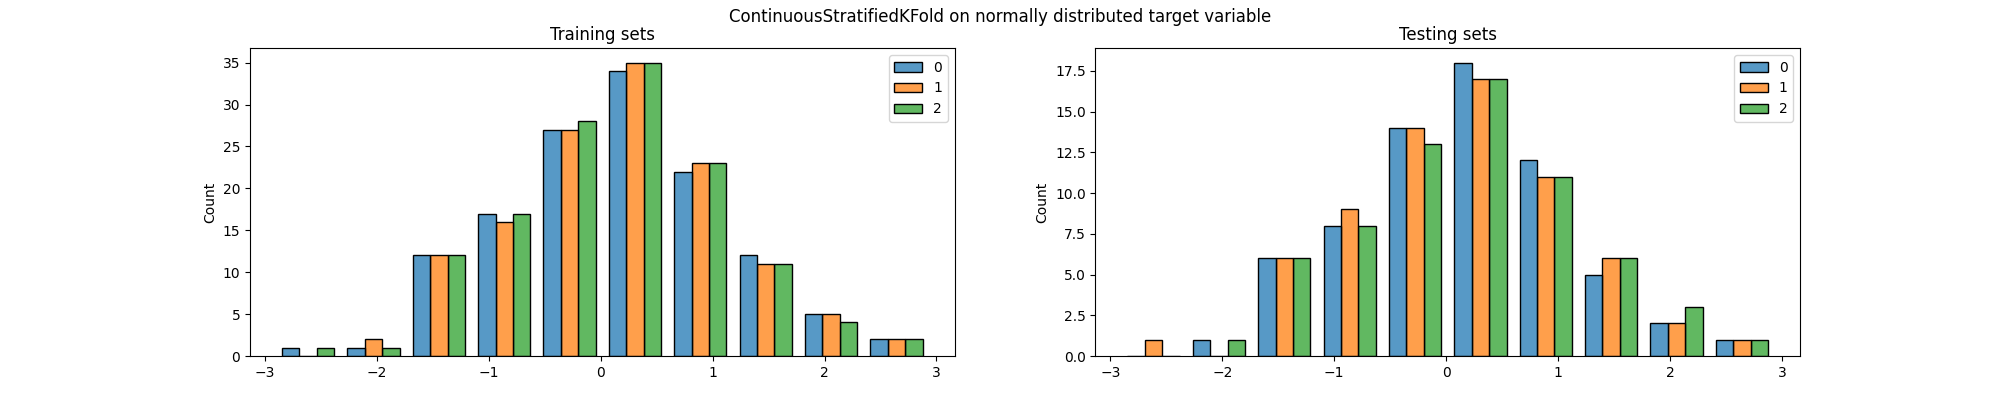 ContinuousStratifiedKFold on normally distributed target variable, Training sets, Testing sets